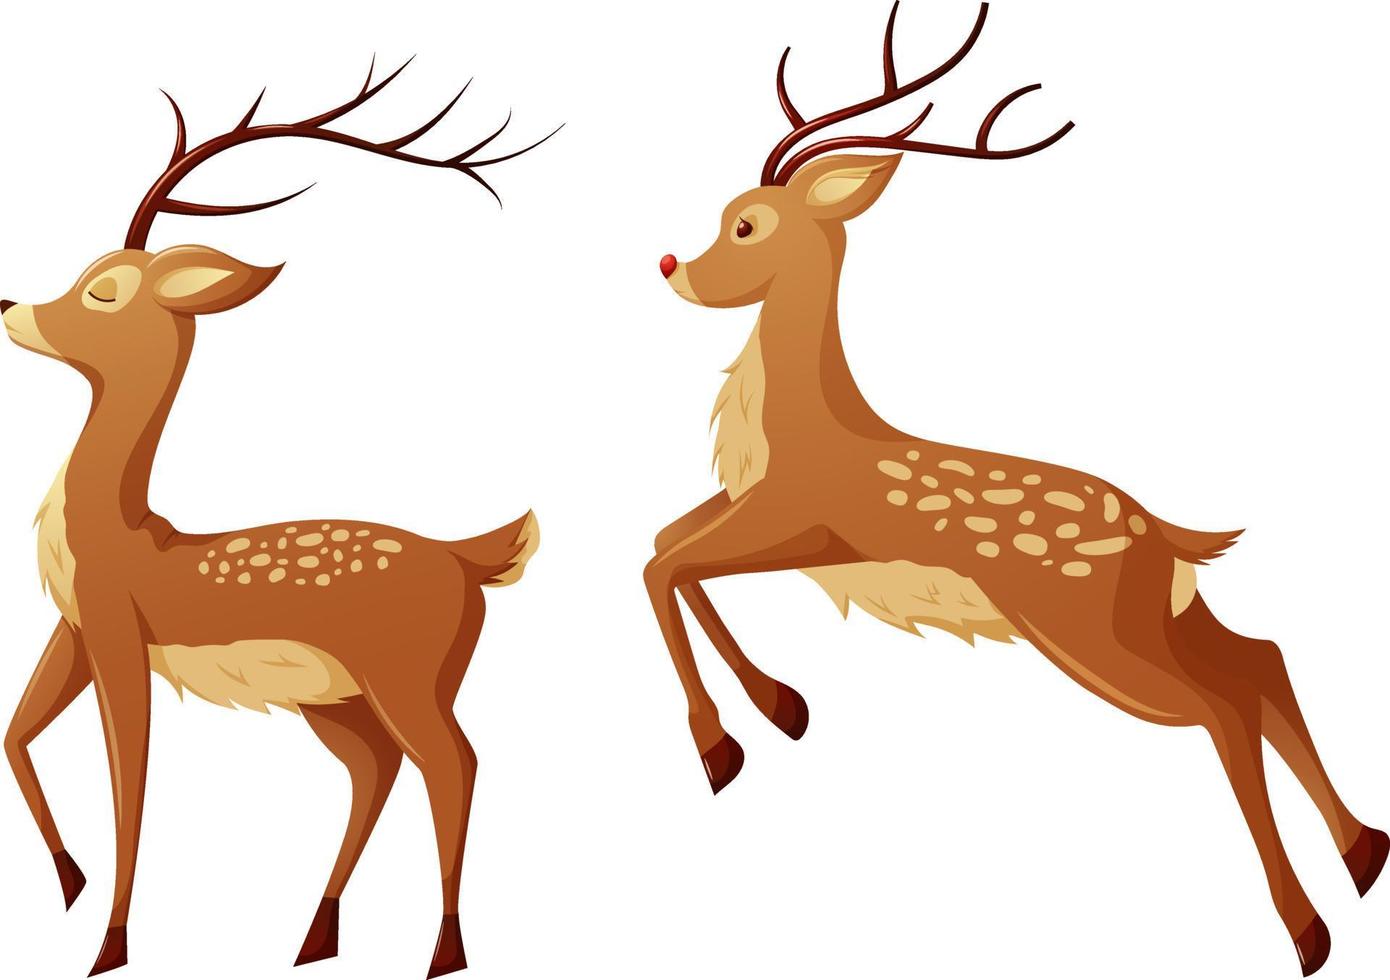 Deer set, jumping and standing Christmas deer in cartoon style isolated vector